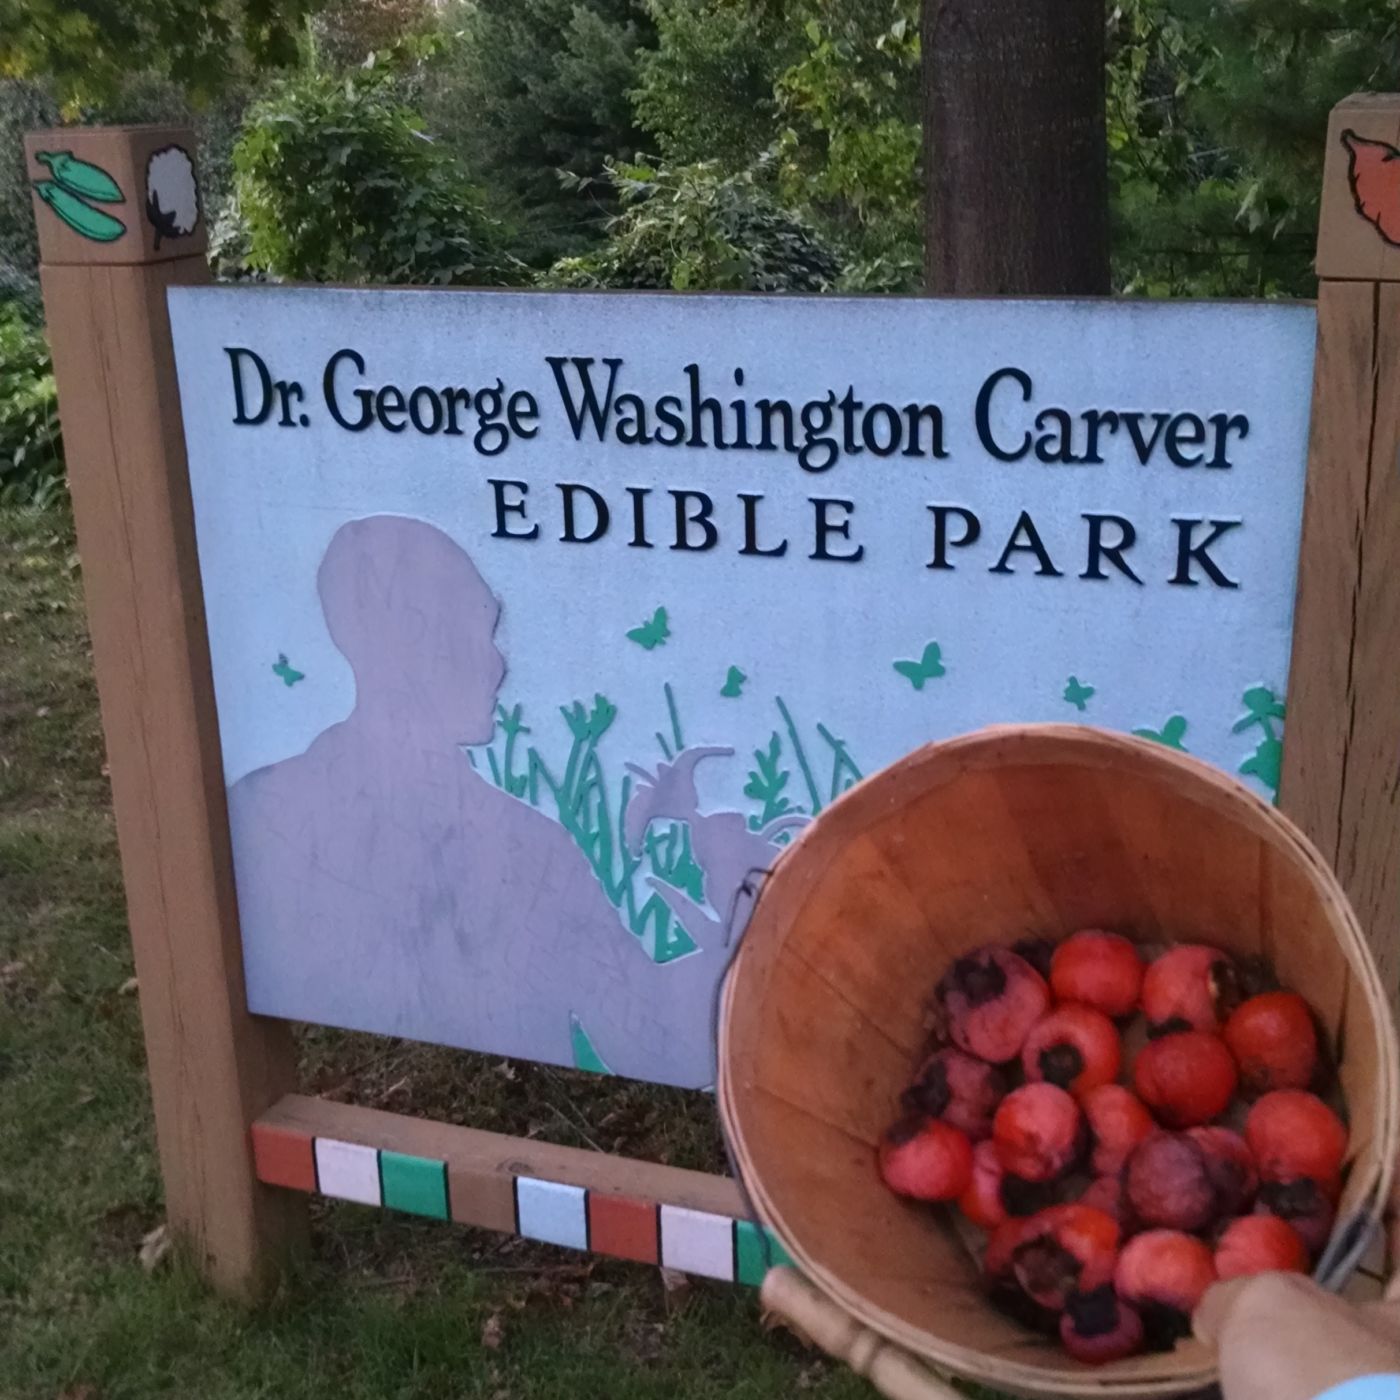 A basket of persimmons in front of a sign reading Dr. George Washington Carver Edible Park.